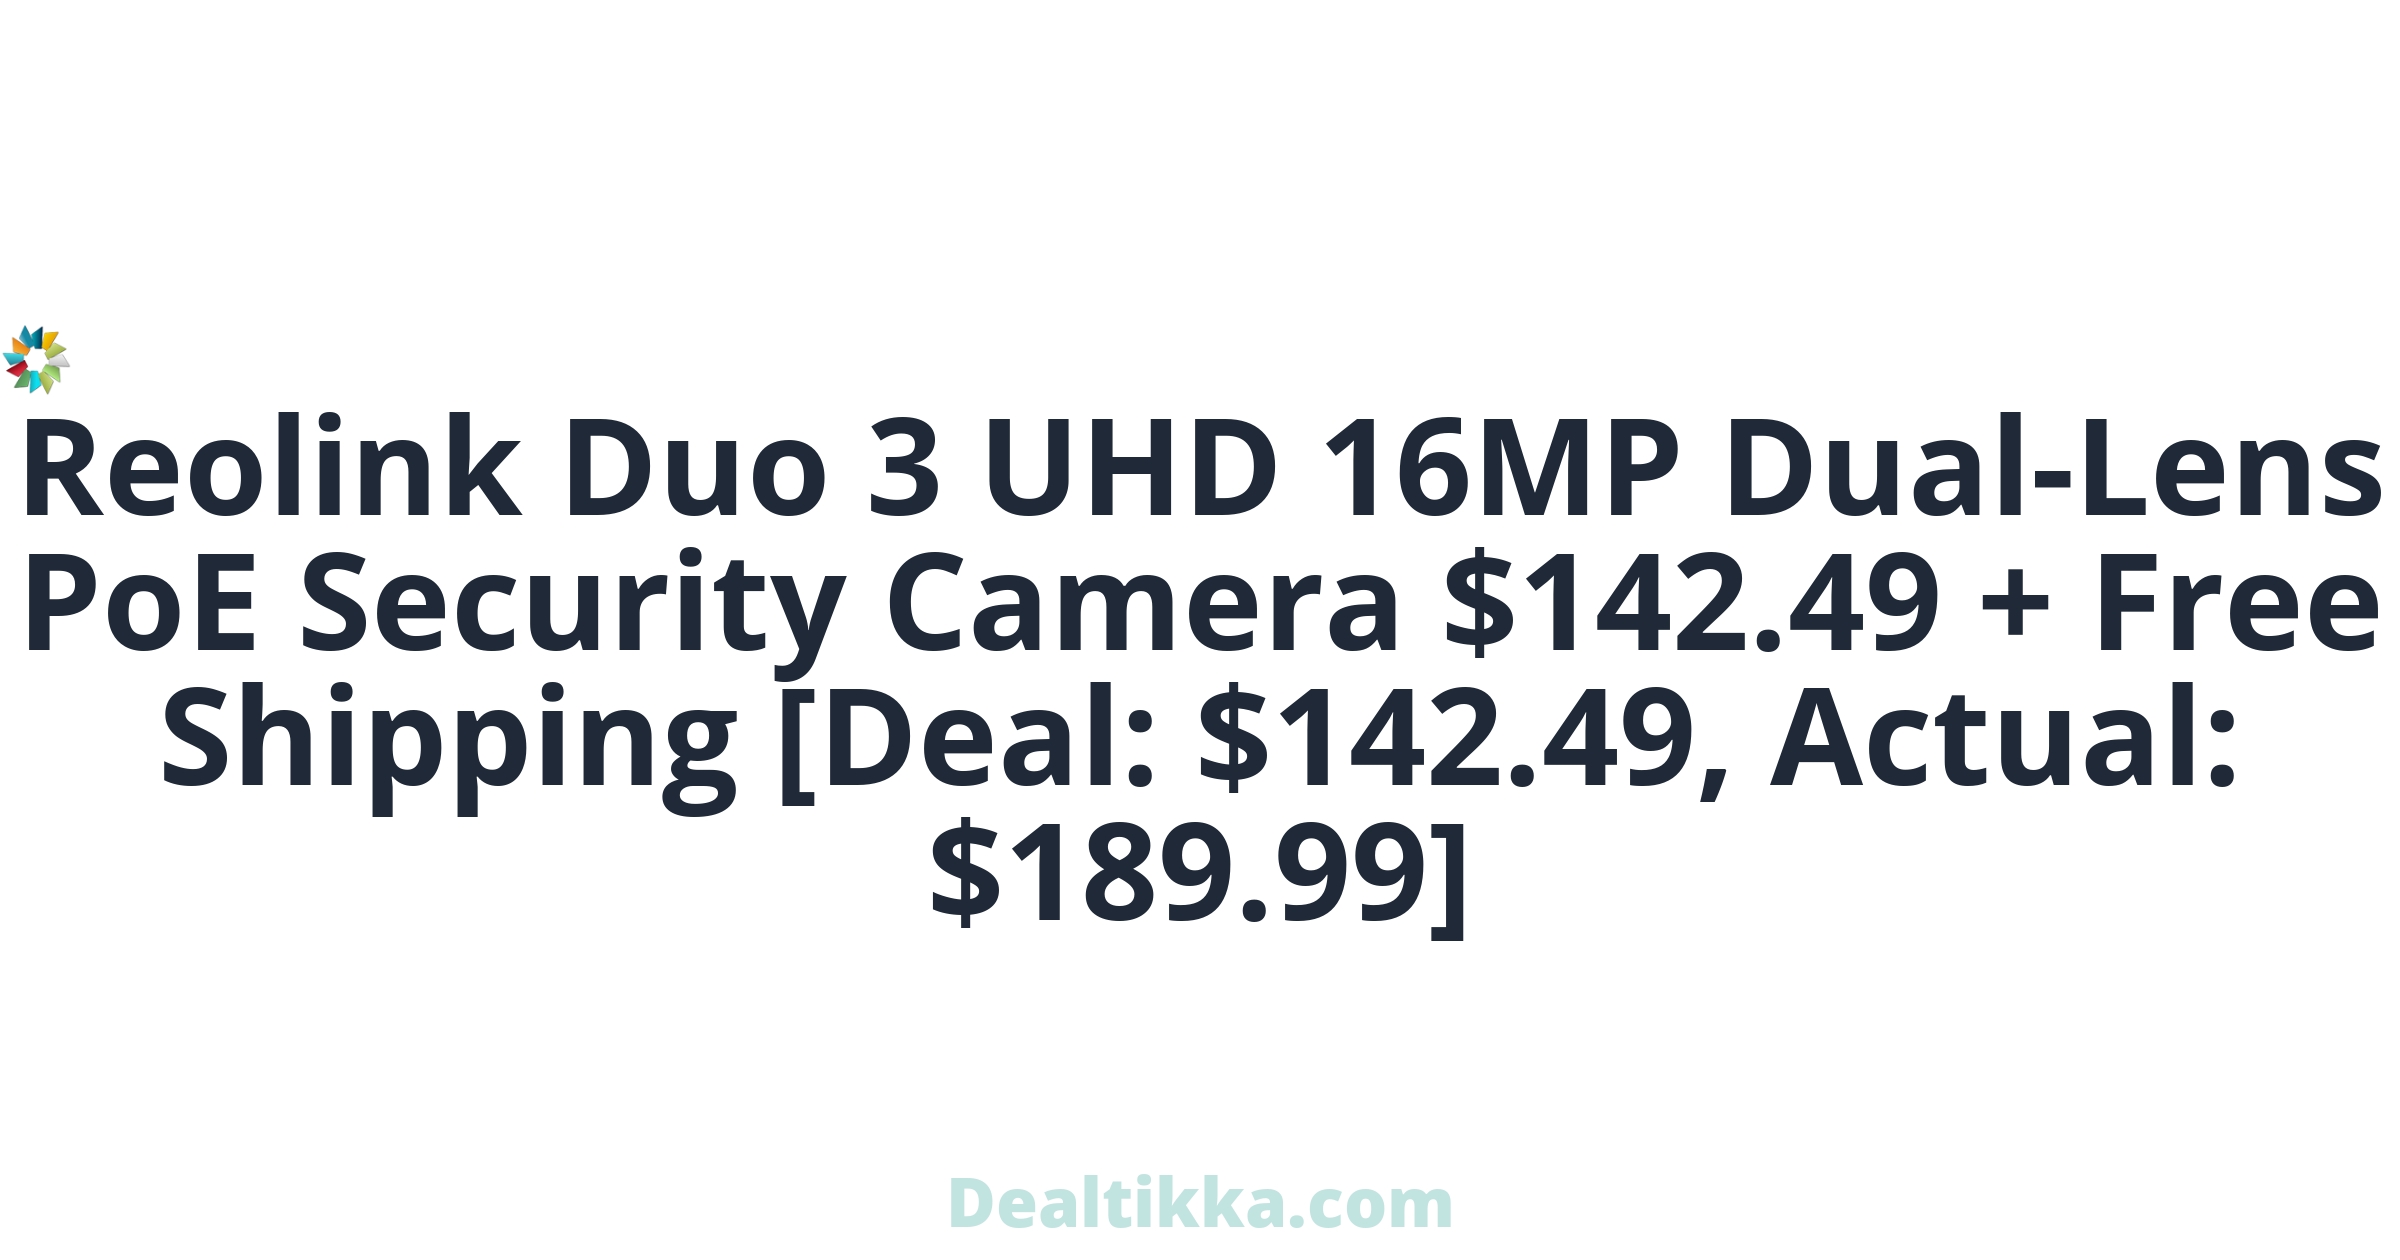 og?fontFamily=Roboto&title=Reolink+Duo+3+UHD+16MP+Dual-Lens+PoE+Security+Camera+%24142.49+%2B+Free+Shipping+%5BDeal%3A+%24142.49%2C+Actual%3A+%24189.99%5D&titleTailwind=text-gray-800%20font-bold%20text-6xl&text=&textTailwind=text-gray-700%20text-2xl%20mt-4&logoUrl=https%3A%2F%2Fwww.dealtikka.com%2Fimg%2Fdt_80_80.png&logoTailwind=h-8&bgTailwind=bg-blueGray-200&footer=Dealtikka.com&footerTailwind=text-teal-600%20font-black%20opacity-25%20text-3xl&containerTailwind=border-white&t=1717382698576&refresh=1